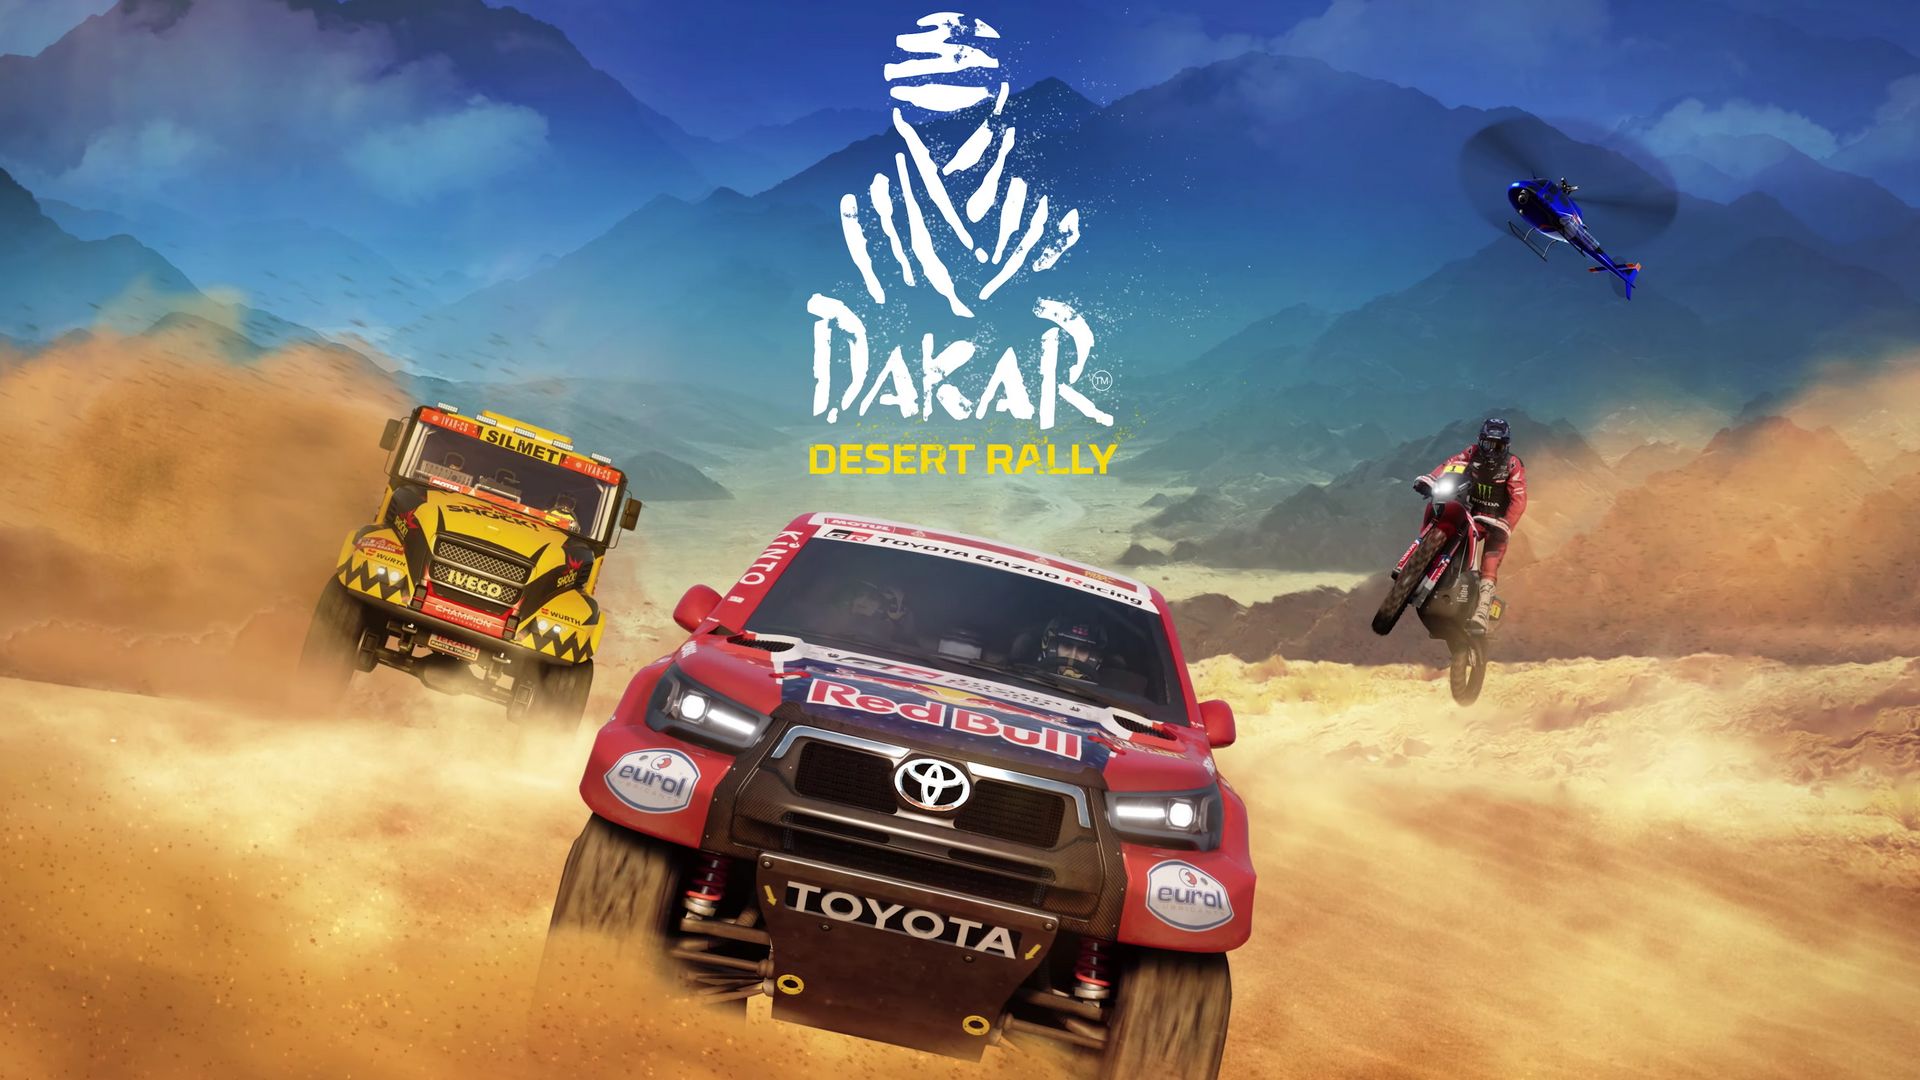 Dakar Desert Rally – Our first impressions of a very promising match!  |  Xbox One